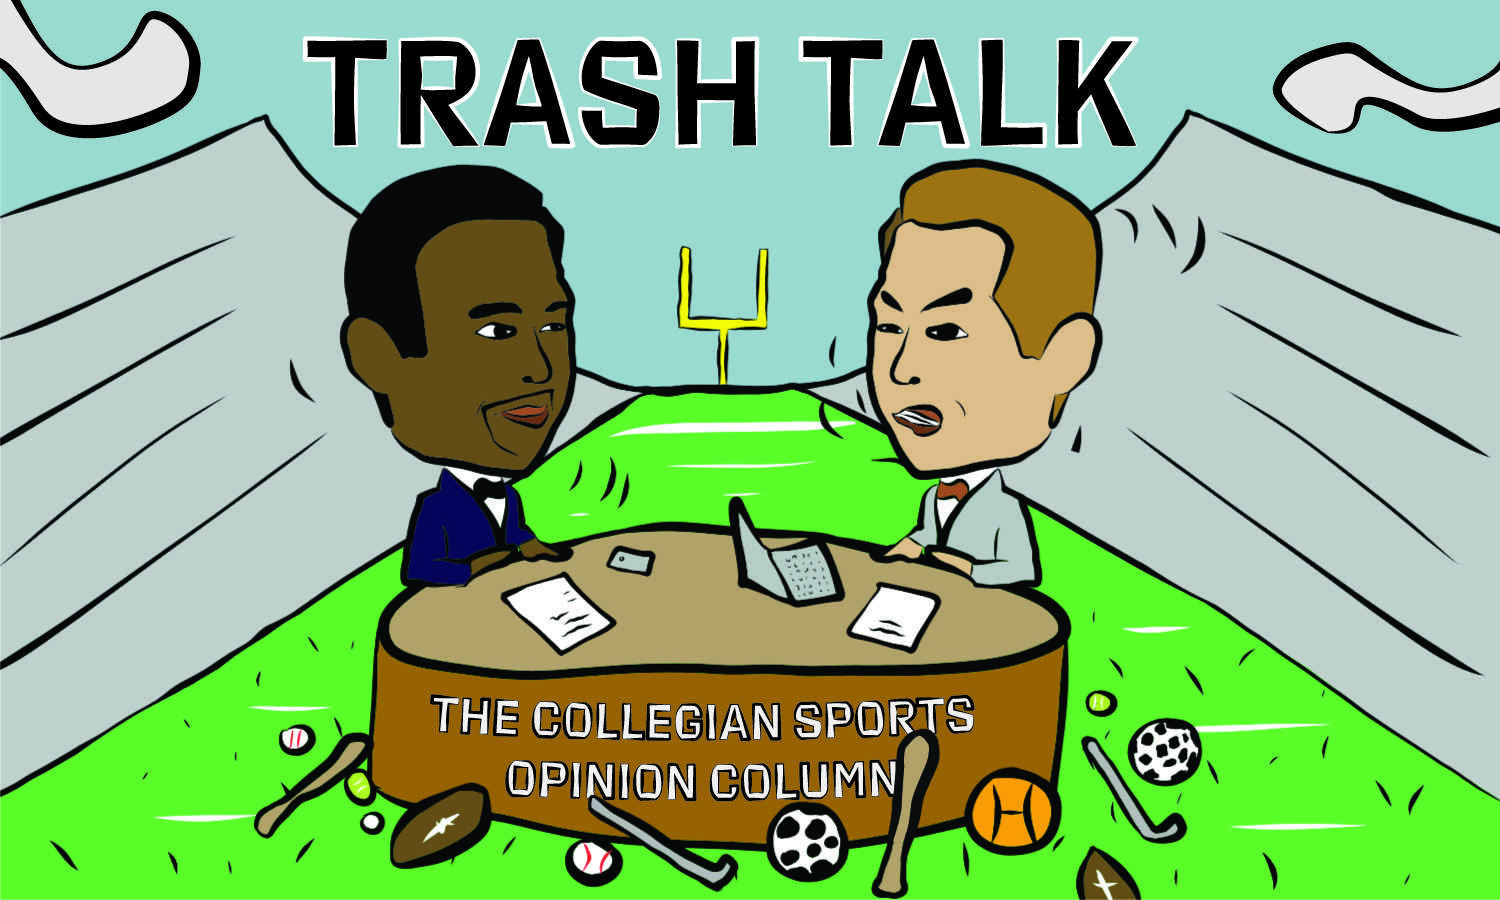 graphic illustration of two sports newscaster bobble heads talking sports on a field with the title "Trash Talk" written above